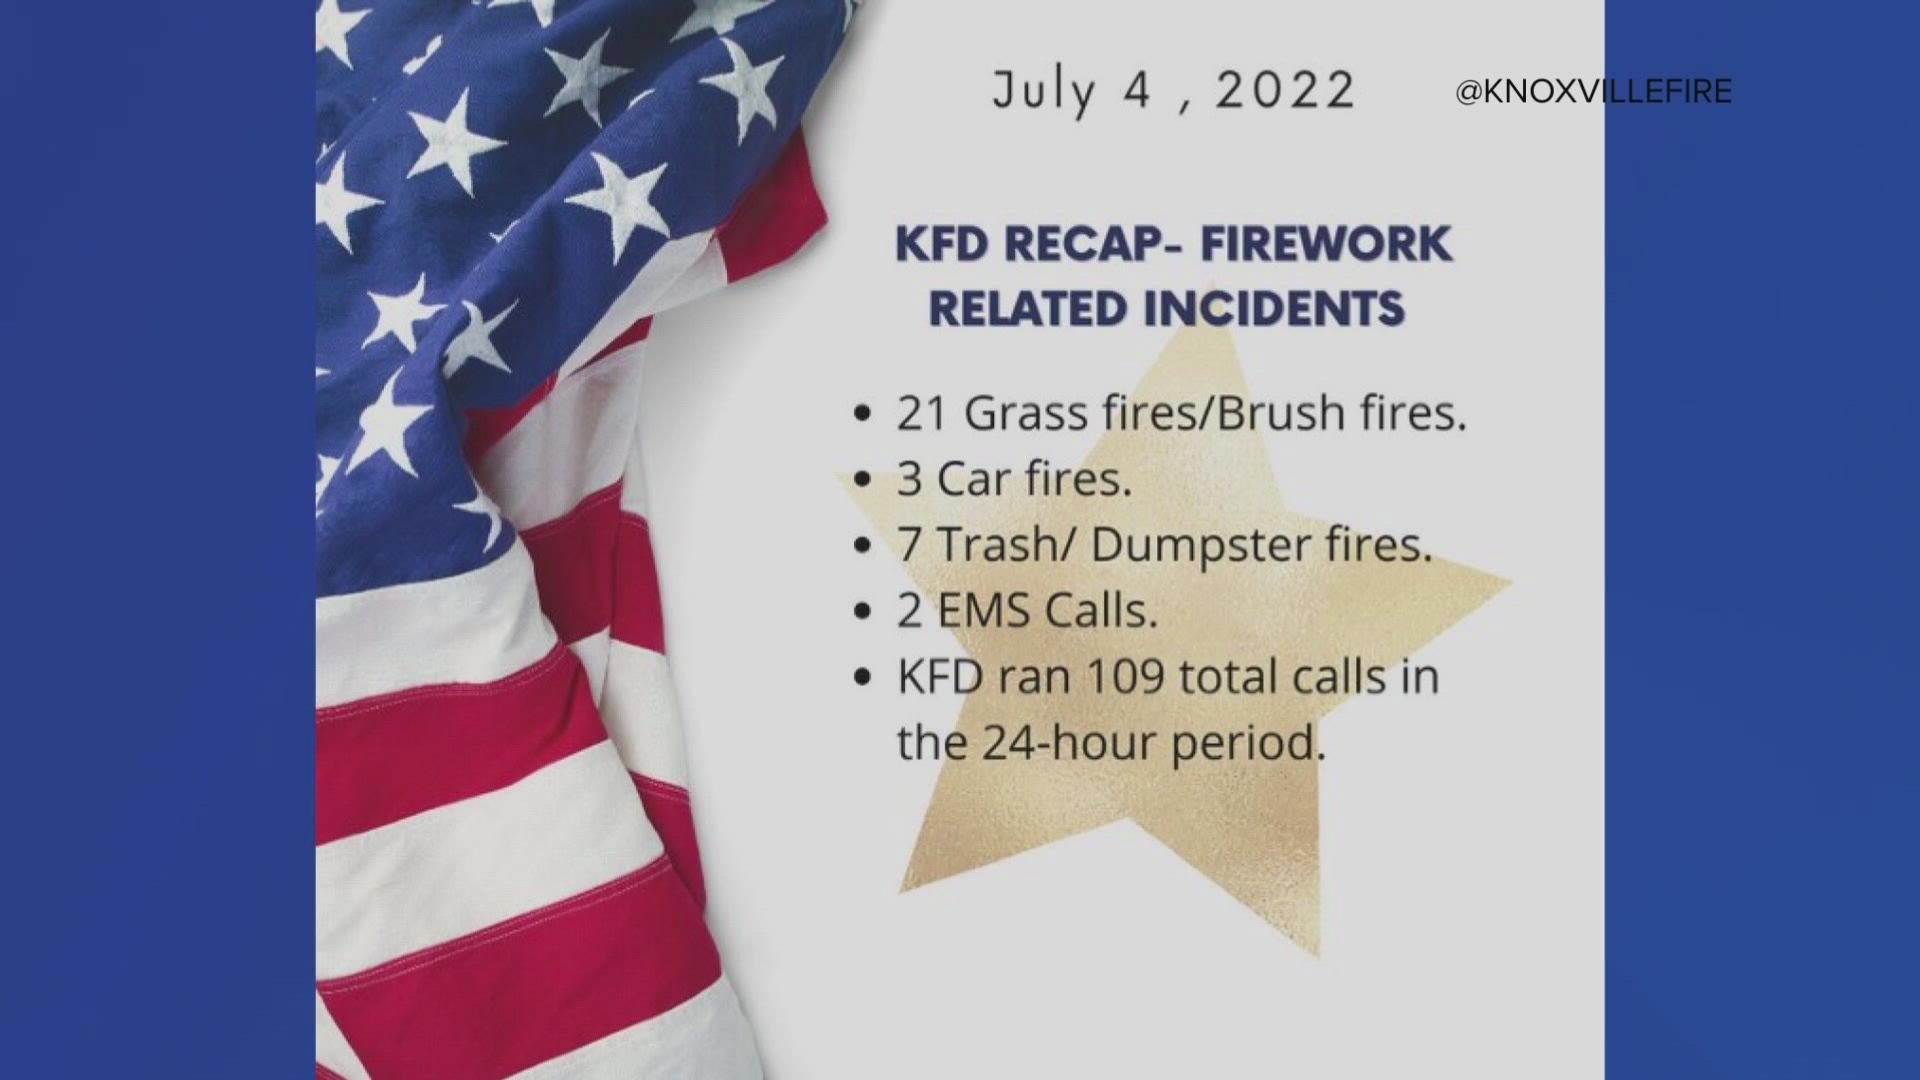 The Knoxville Fire Department said they responded to 109 calls on the Fourth of July.